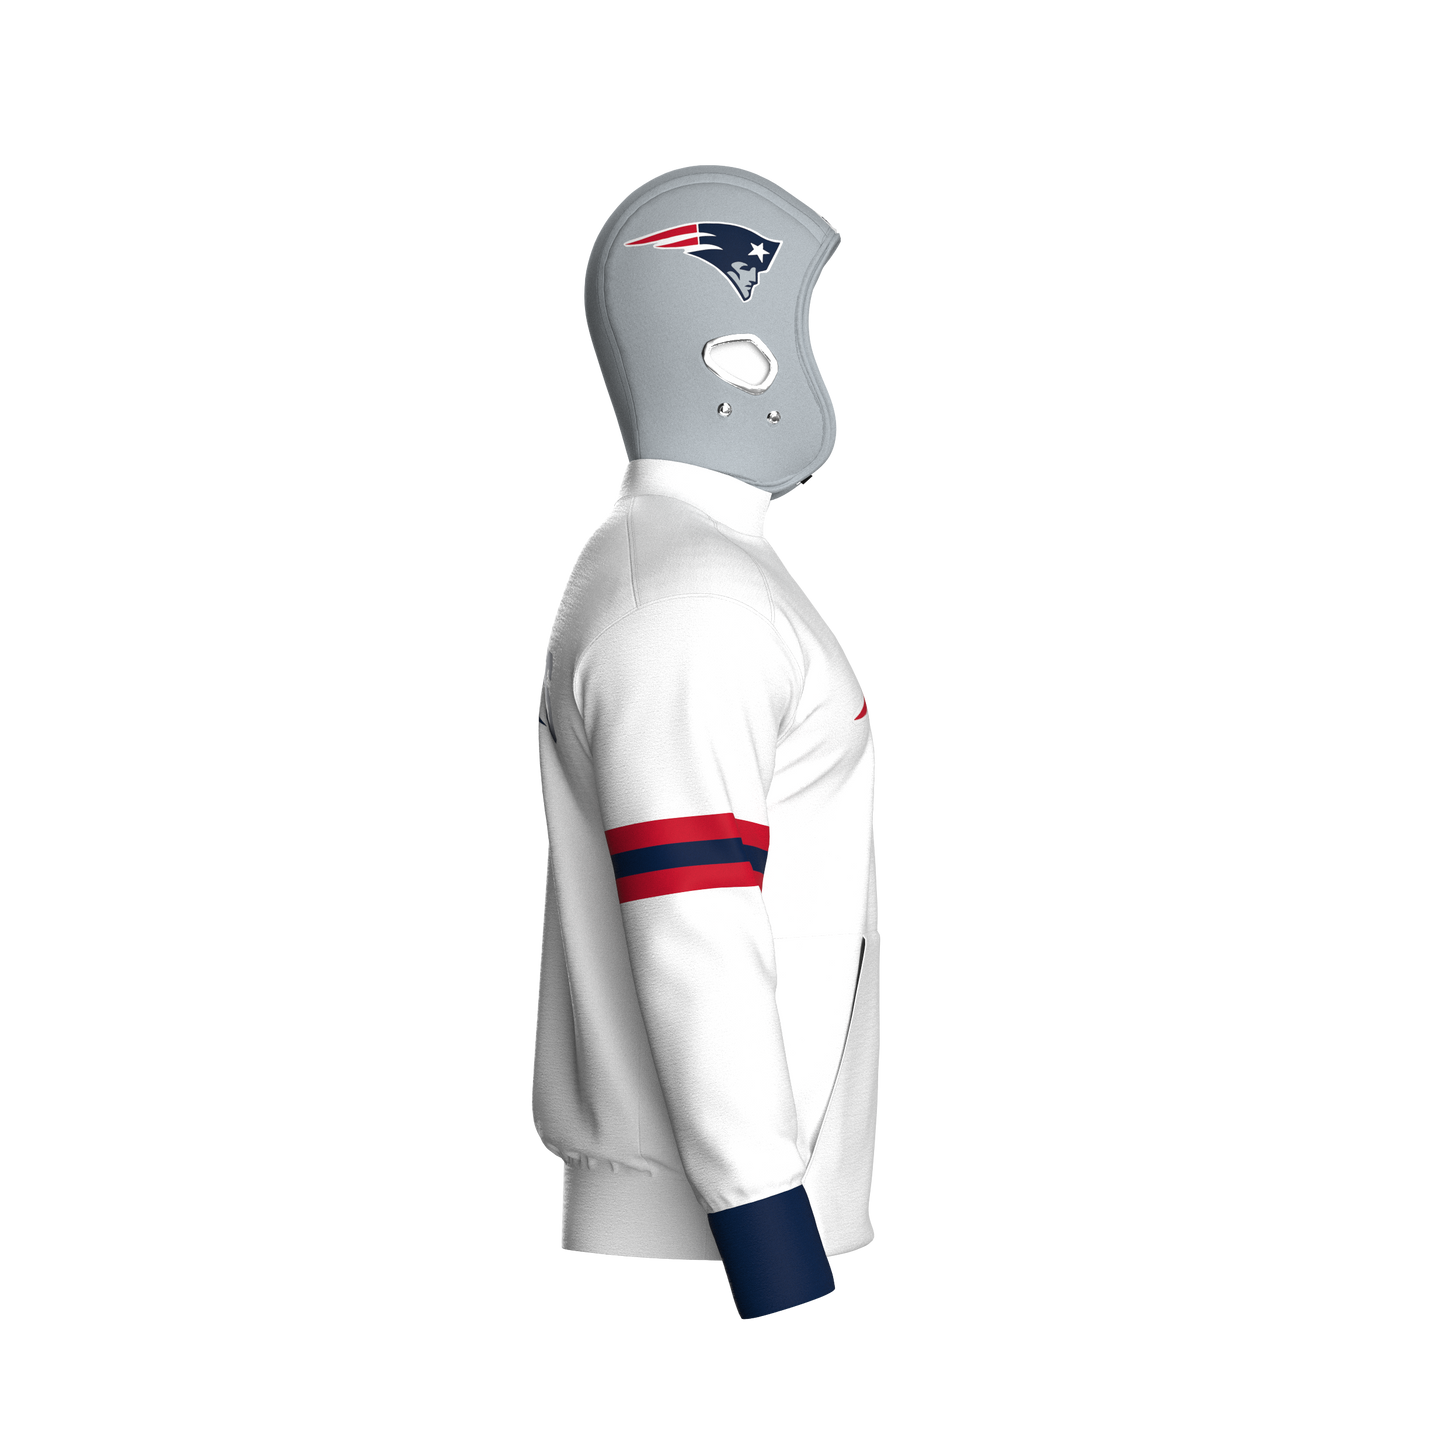 New England Patriots Away Pullover (adult)